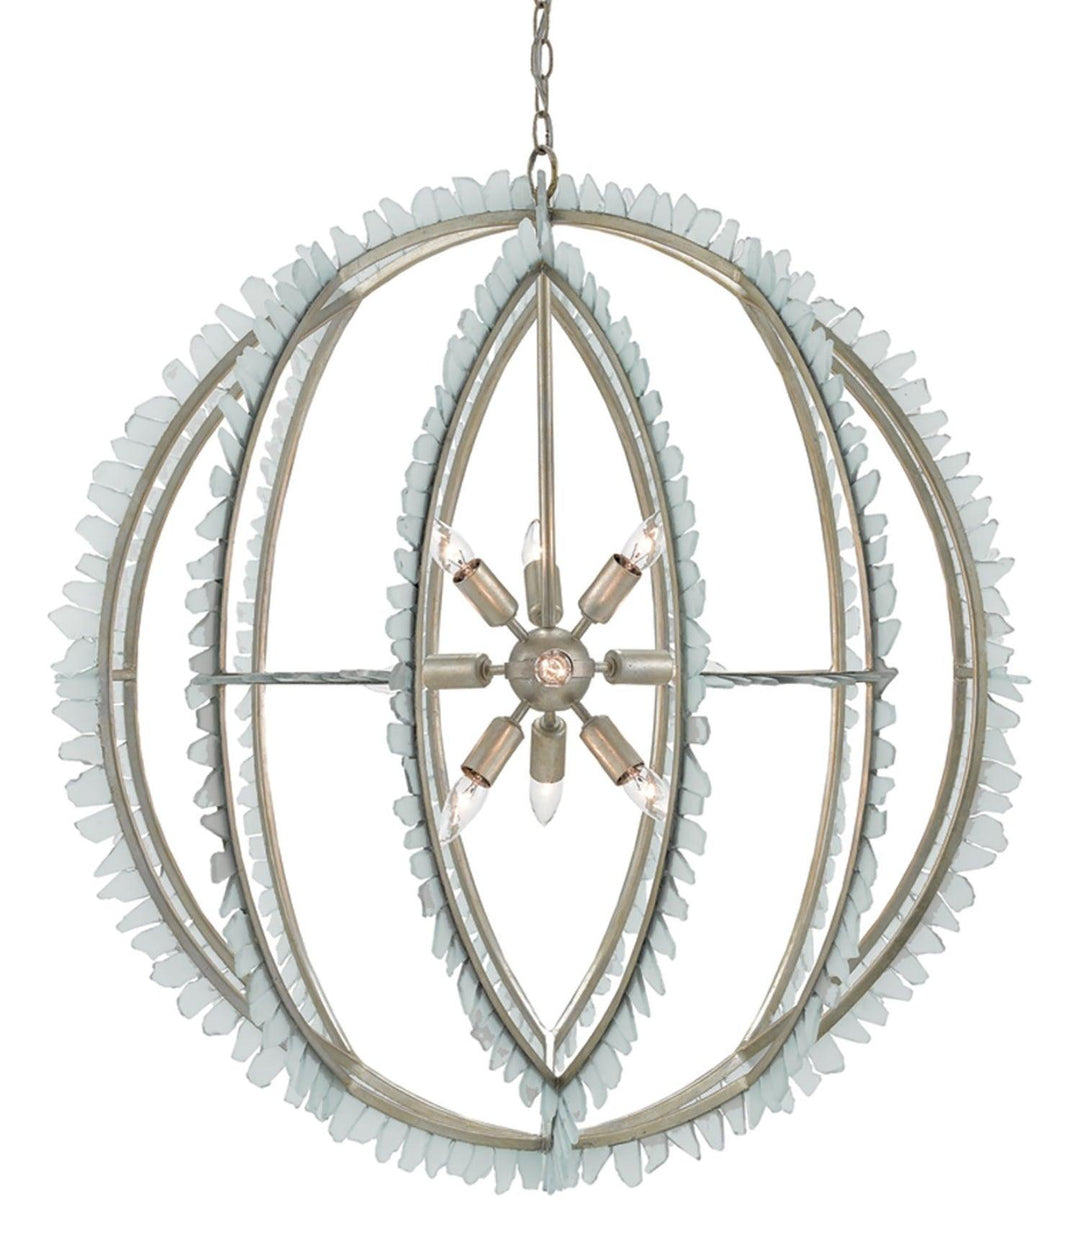 Saltwater Orb Chandelier - Casey & Company